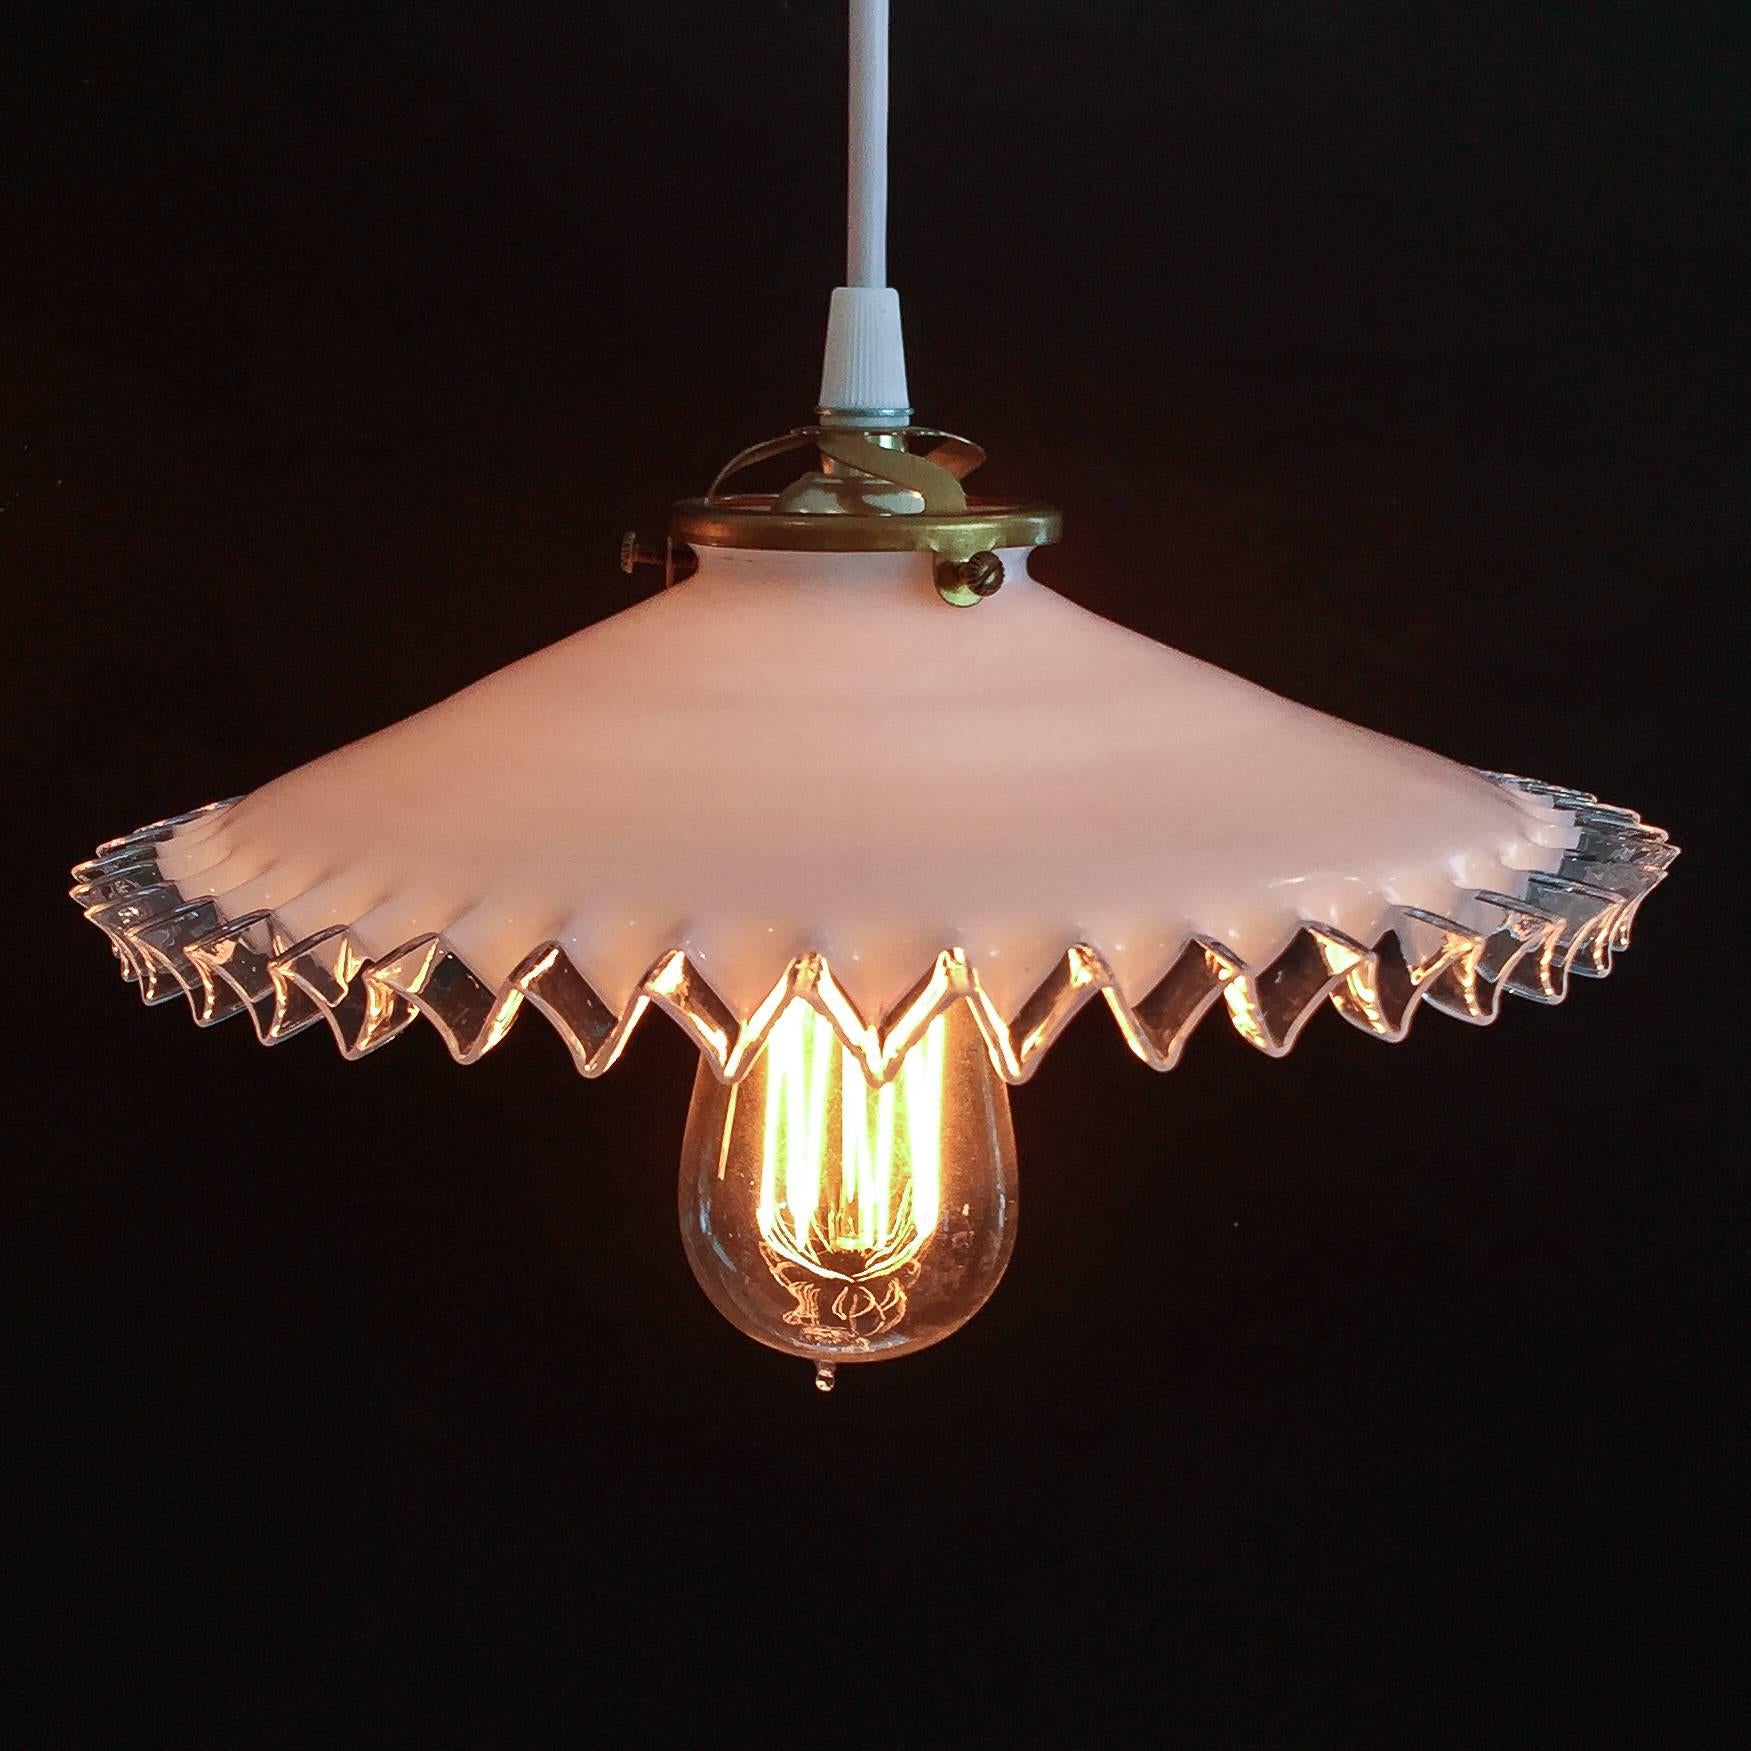 20th Century French Hanging Light Fixtures with Antique Shades, circa 1900 For Sale